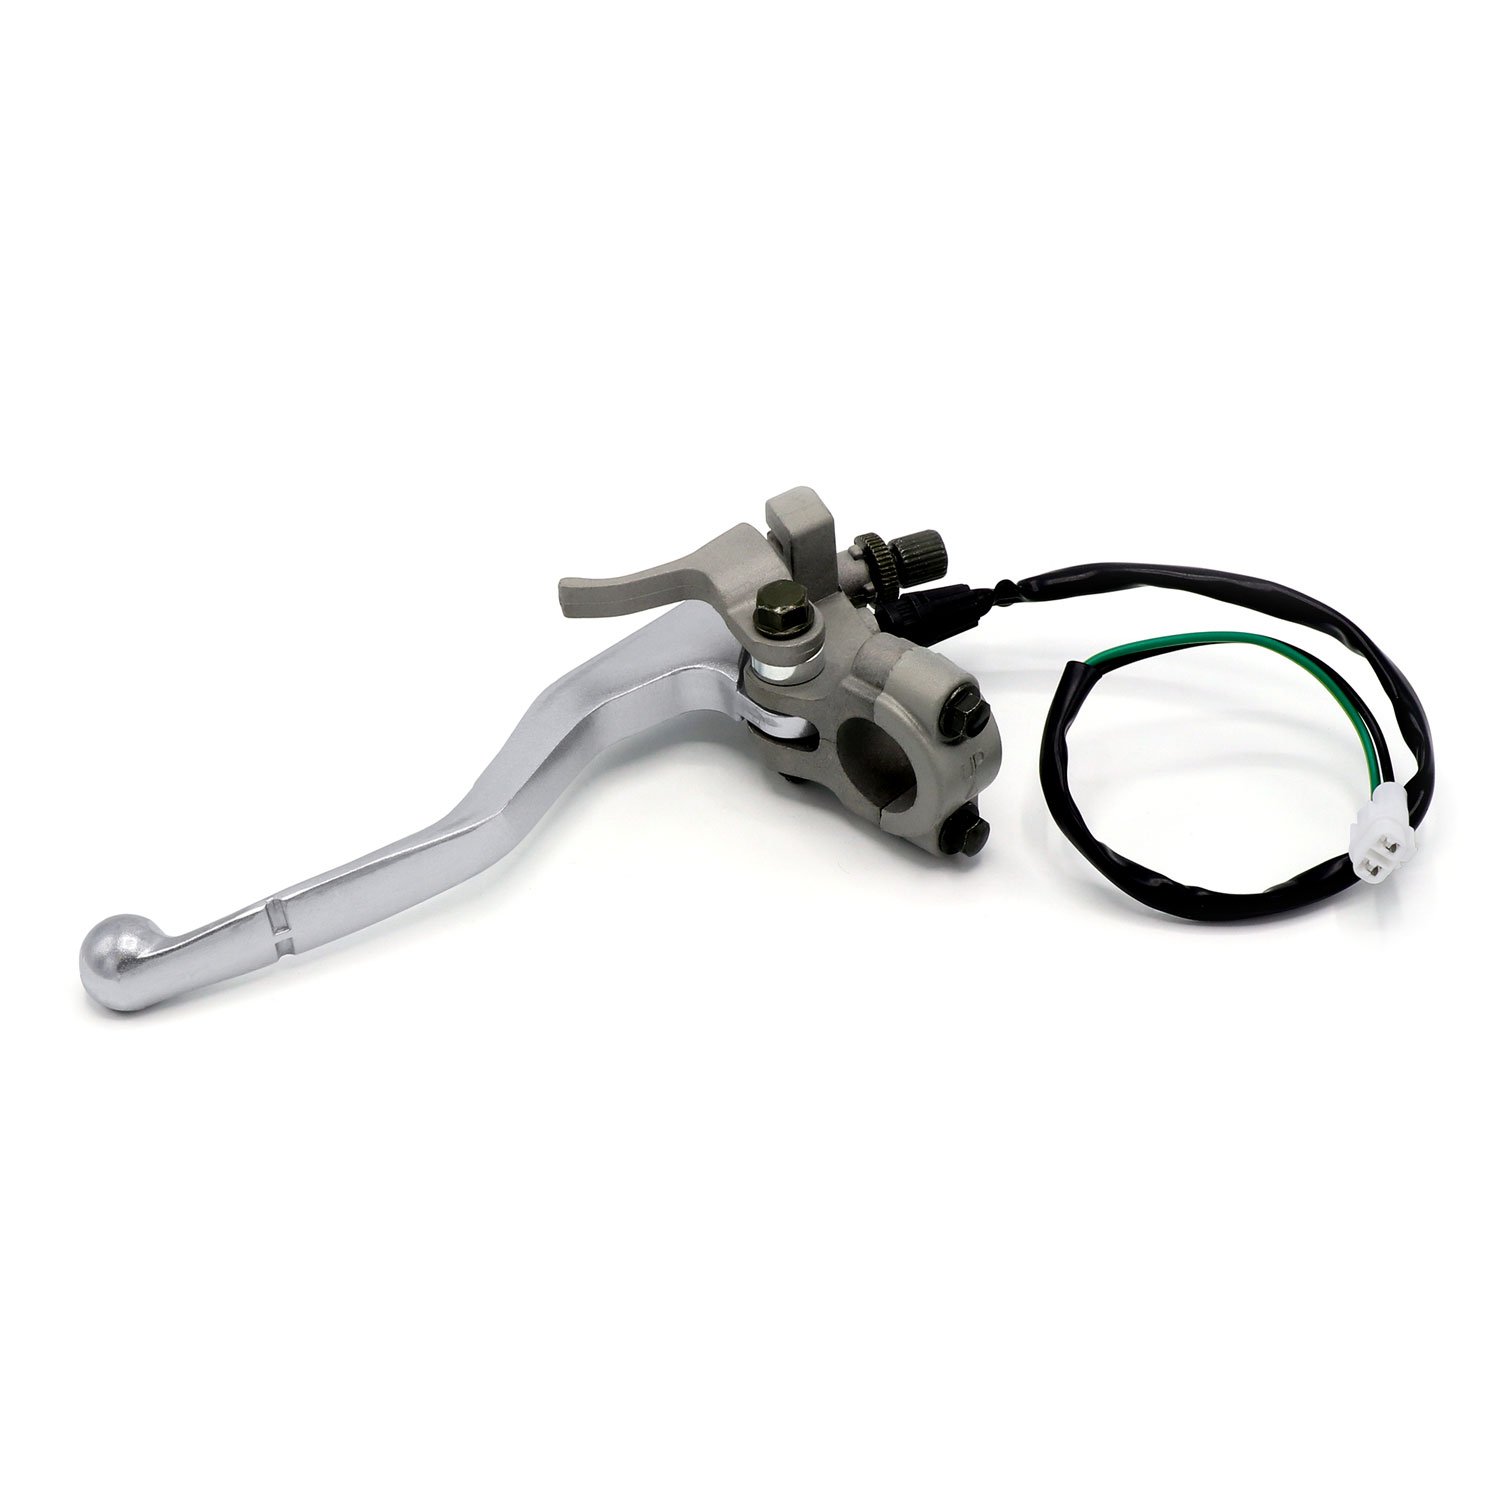 125CC Dirt Pit Bike 22mm 7/8 inch Akozon Clutch Lever,Handlebar Folding Clutch Lever with Perch for 50CC 